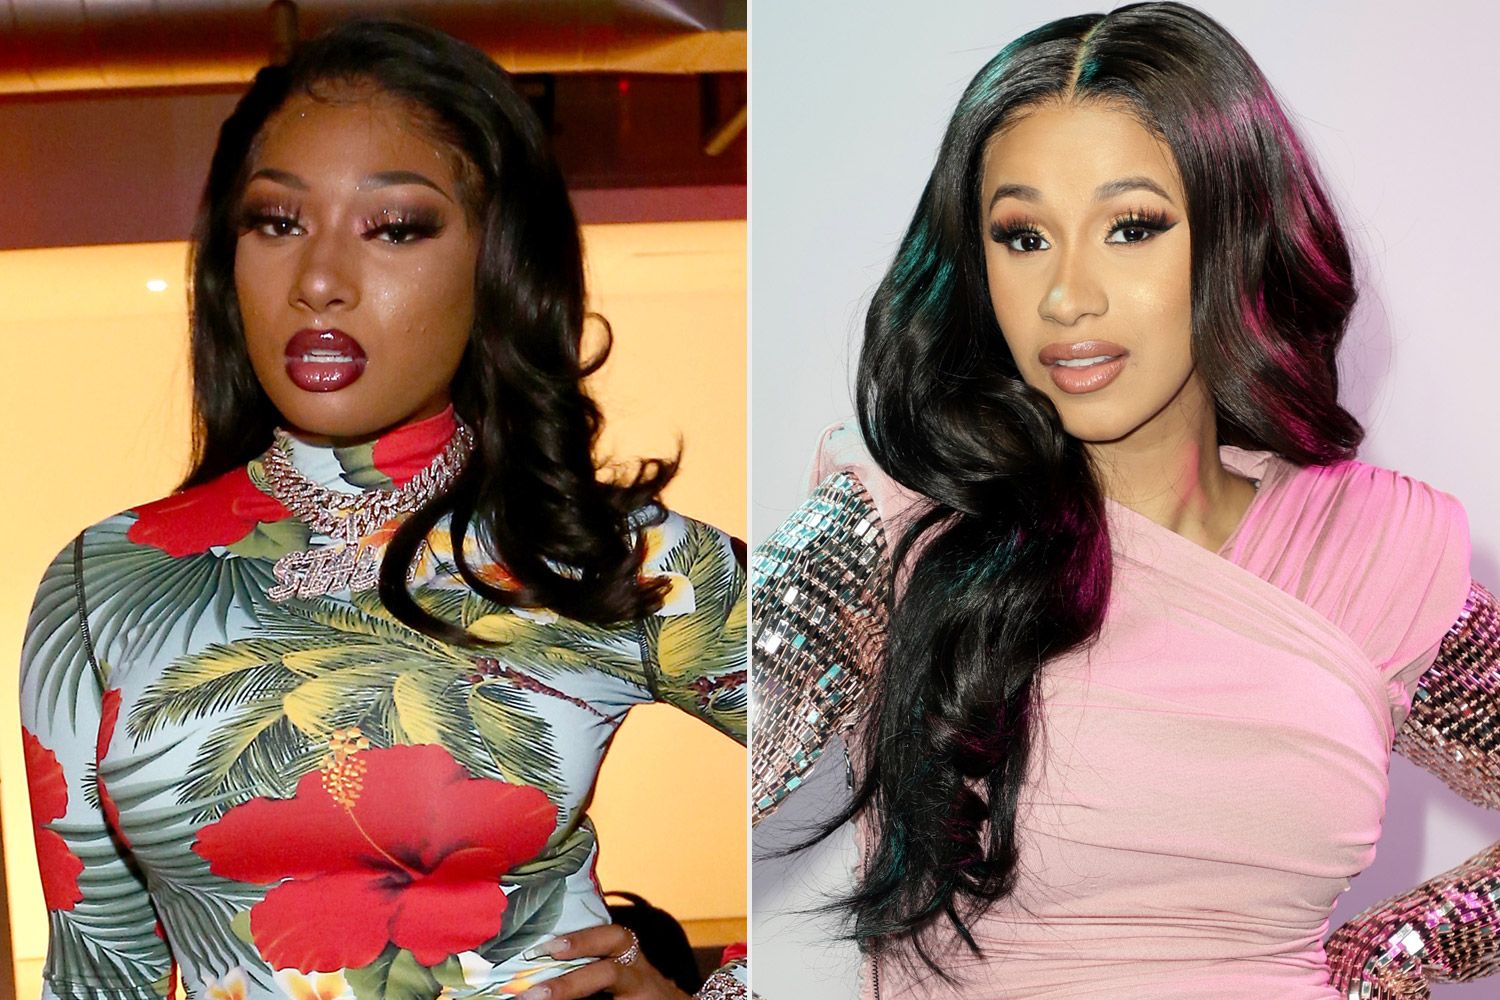 Megan Thee Stallion Slams Claims She Has Beef with Cardi B